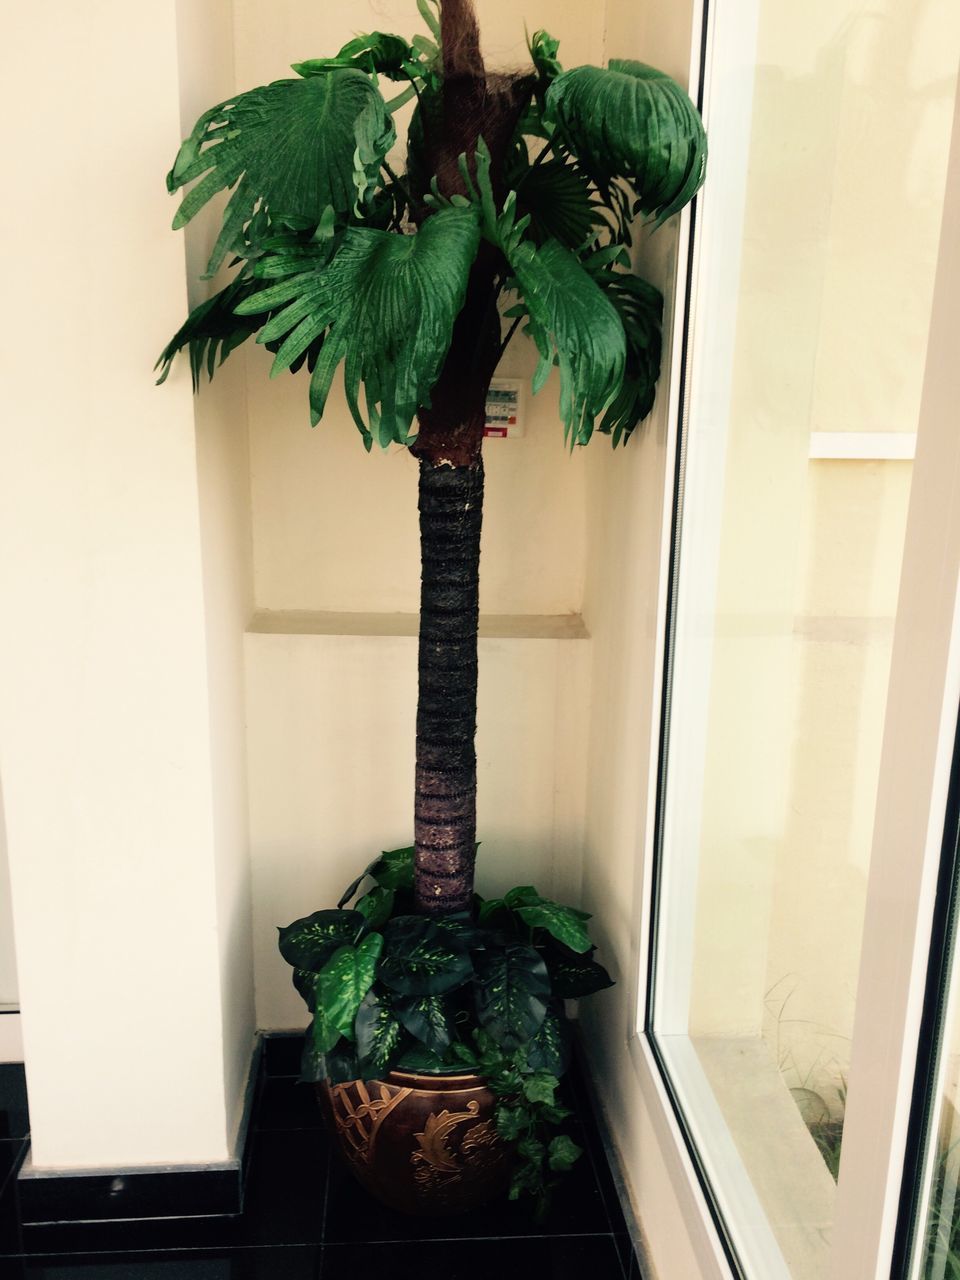 PALM TREE BY PLANTS AT HOME